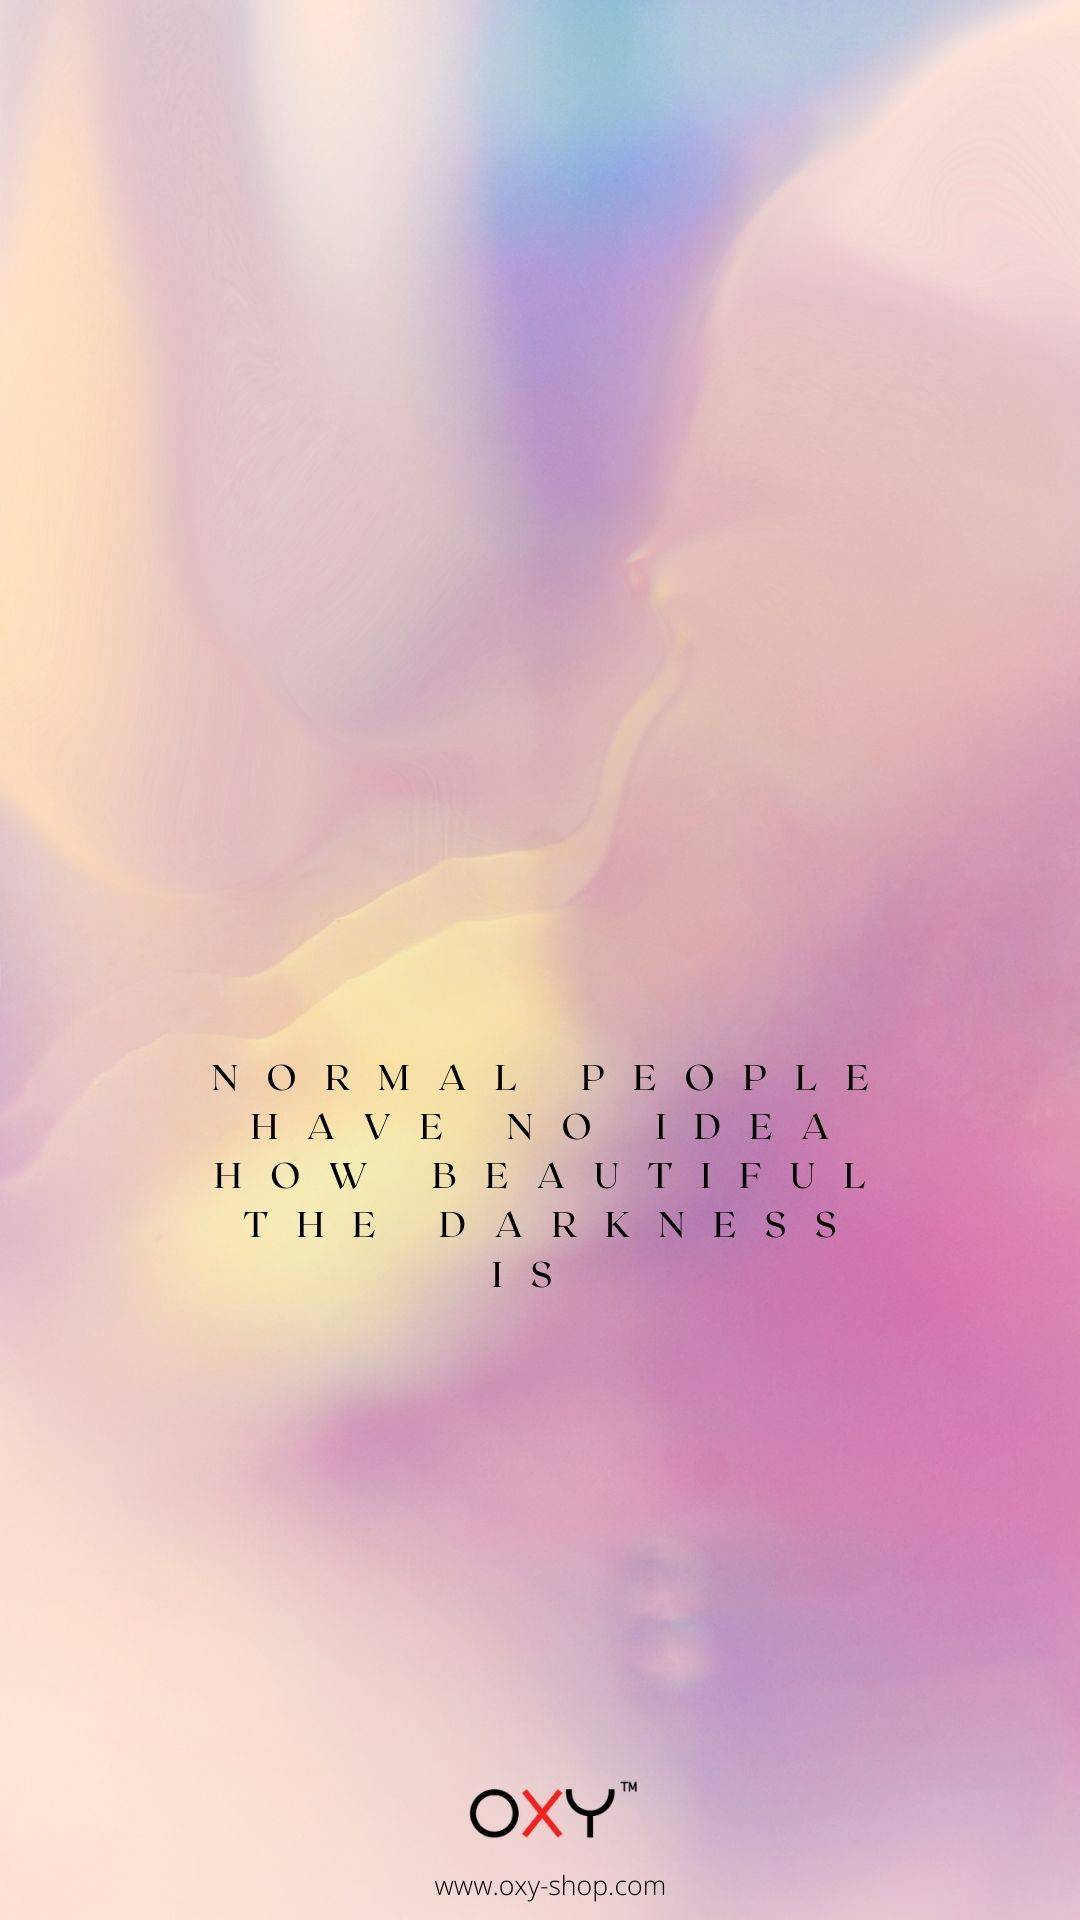 Normal people have no idea how beautiful the darkness is. - BDSM wallpaper